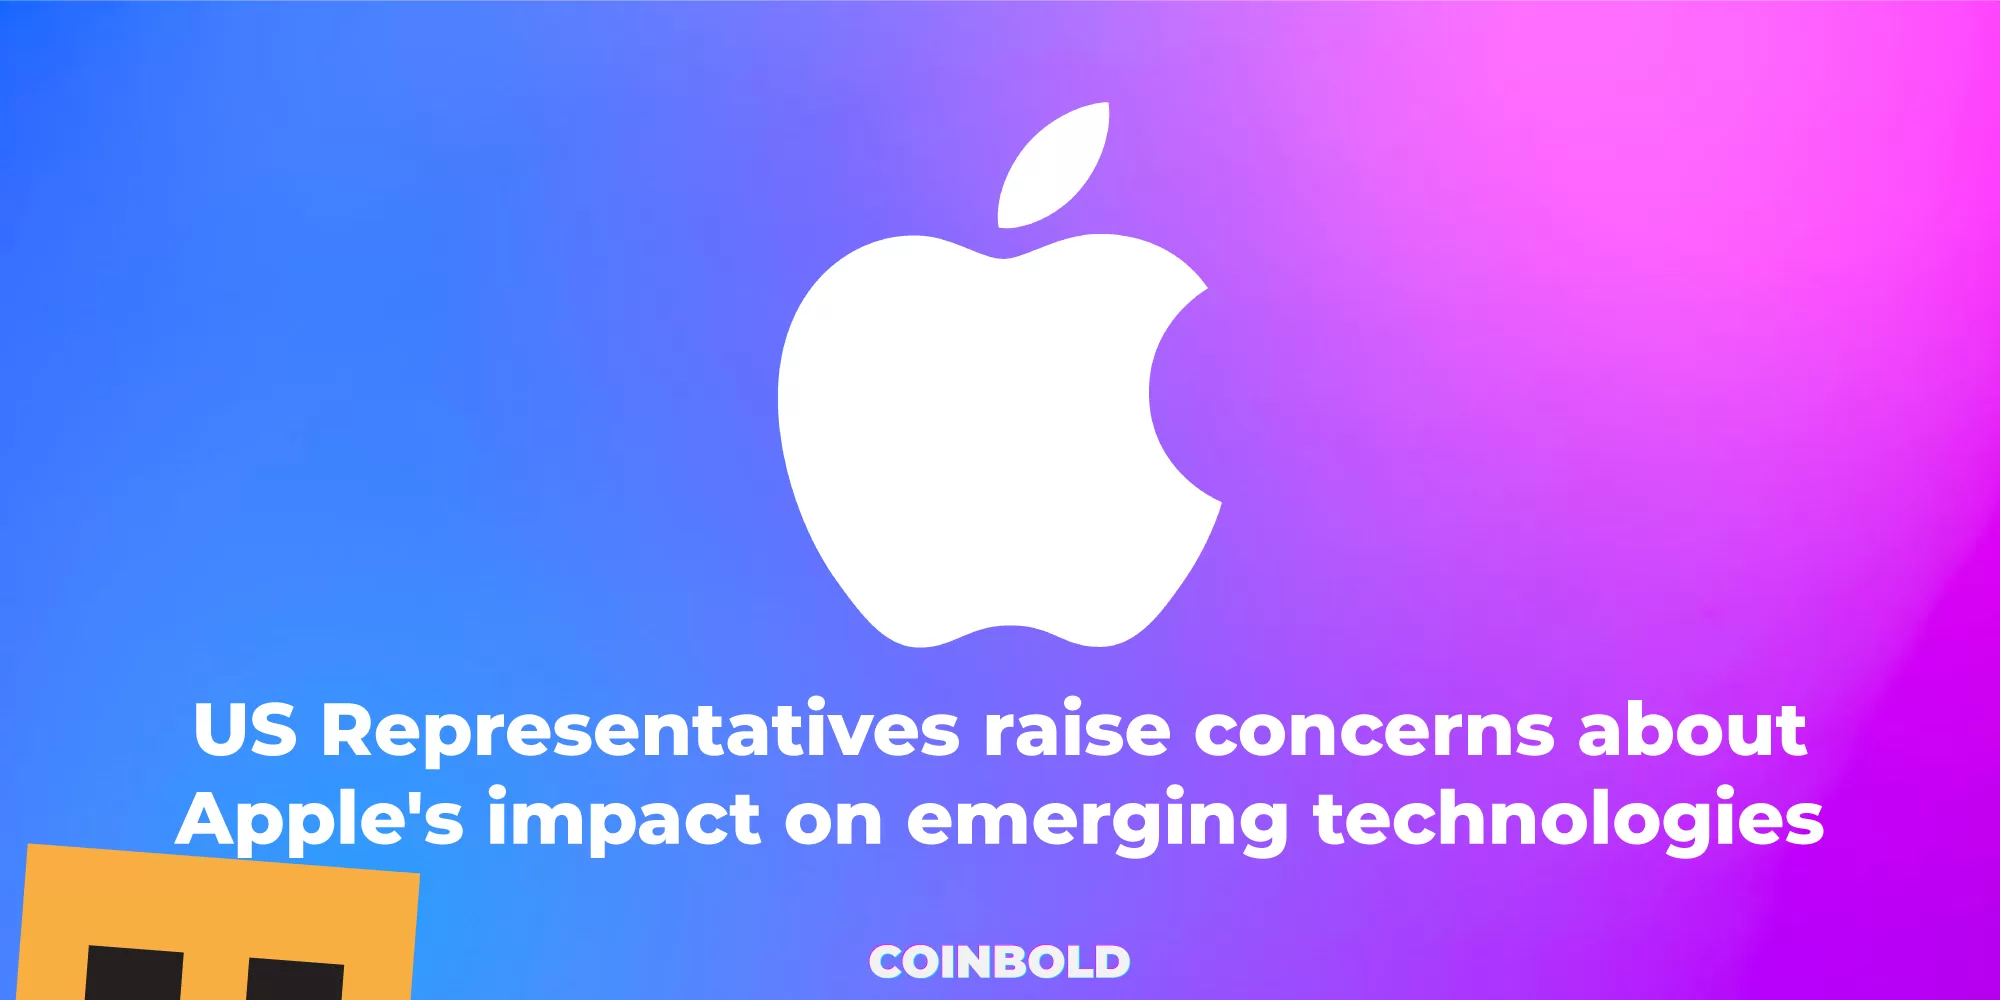 US Representatives raise concerns about Apple's impact on emerging technologies.